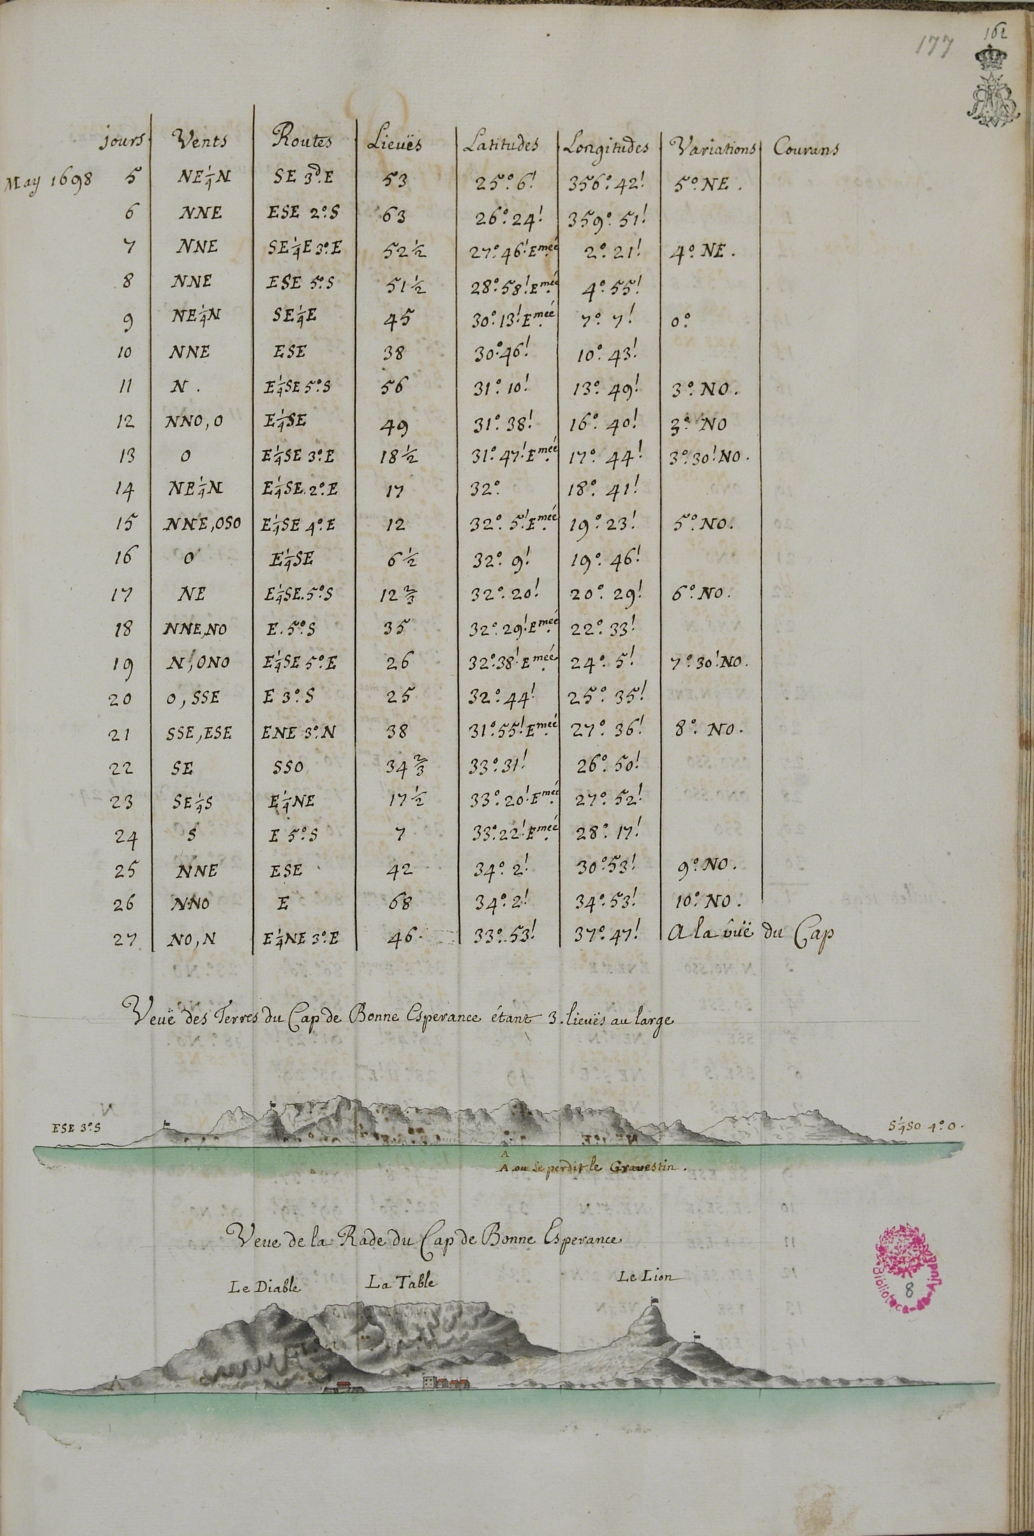 Table of jours, vents, routes, lieuës, latitudes, longitudes, variantions and courans, May 1698].